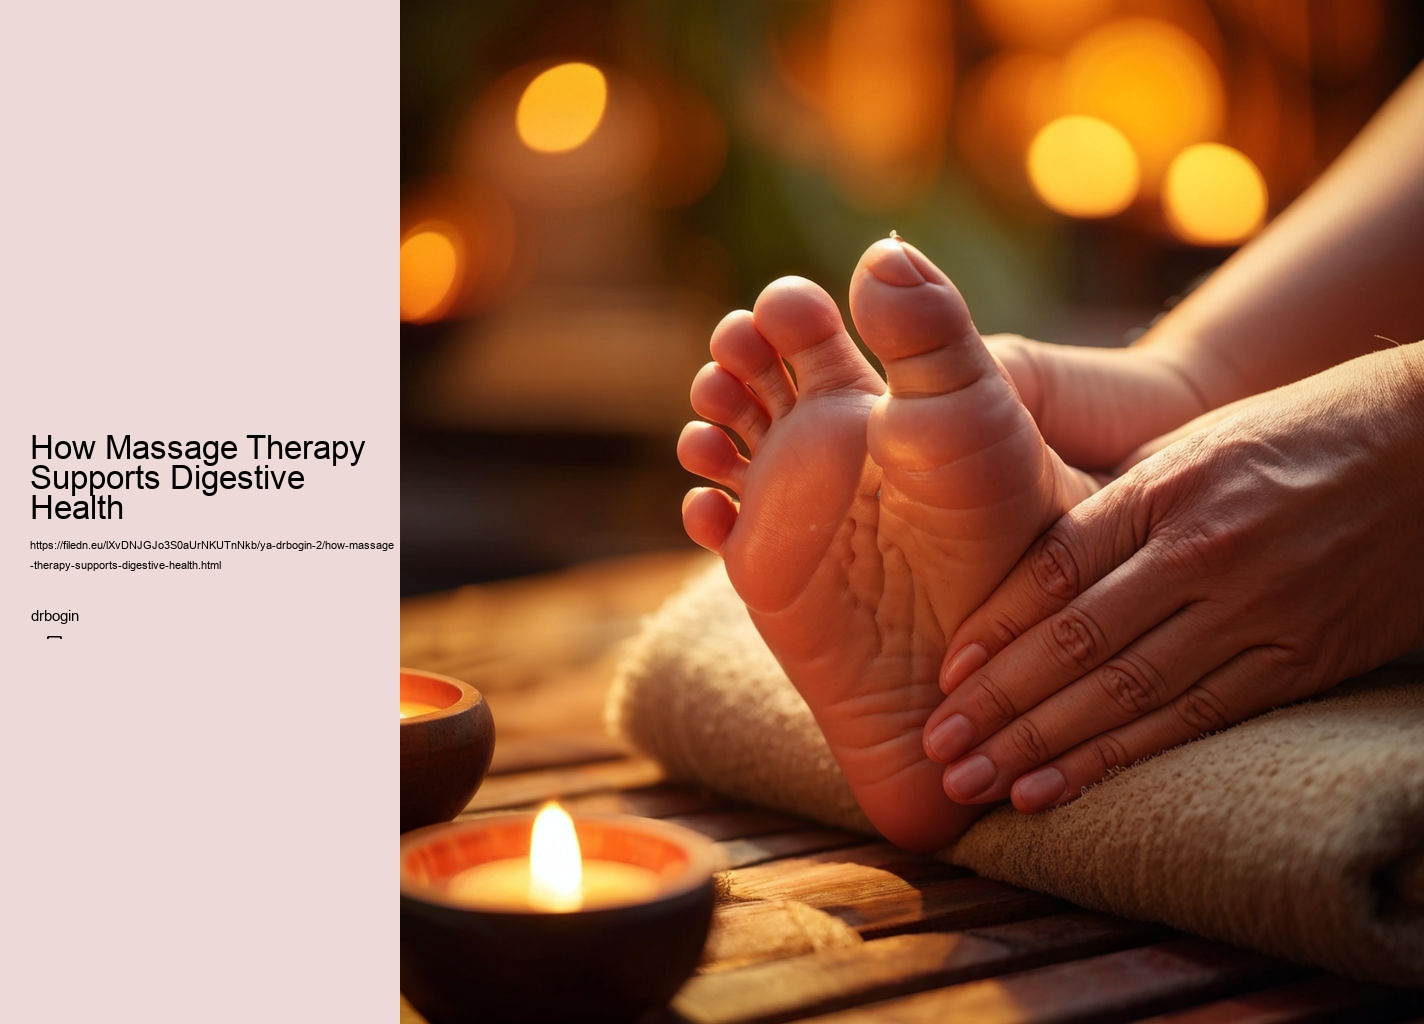 How Massage Therapy Supports Digestive Health